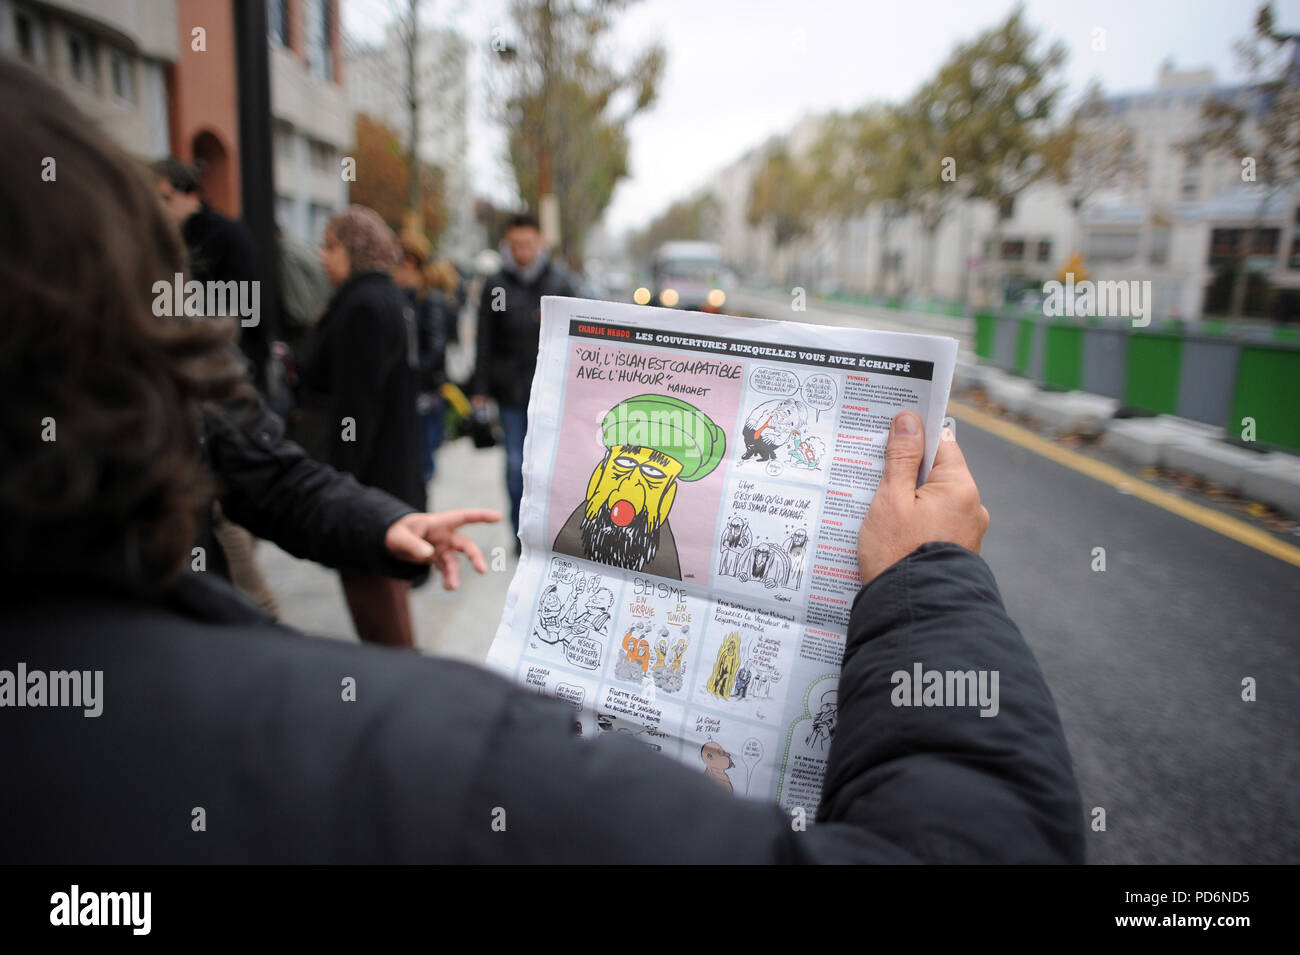 November 2, 2011 - Paris, France: People pick up copies of Charlie Hebdo's special 'Sharia Hebdo' edition in front of the office of French satirical weekly paper Charlie Hebdo after an overnight petrol bomb attack. The paper was targeted after publishing a caricature of prophet Muhammad on its front cover for a special issue entitled 'Shariah Hebdo'. Des gens ramassent et lisent le numero de 'Charia Hebdo' devant les locaux de Charlie Hebdo apres qu'une attaque au cocktail molotov a declenche un incendie et detruit les locaux boulevard Davout de l'hebdomadaire satirique. Cette attaque fait sui Stock Photo